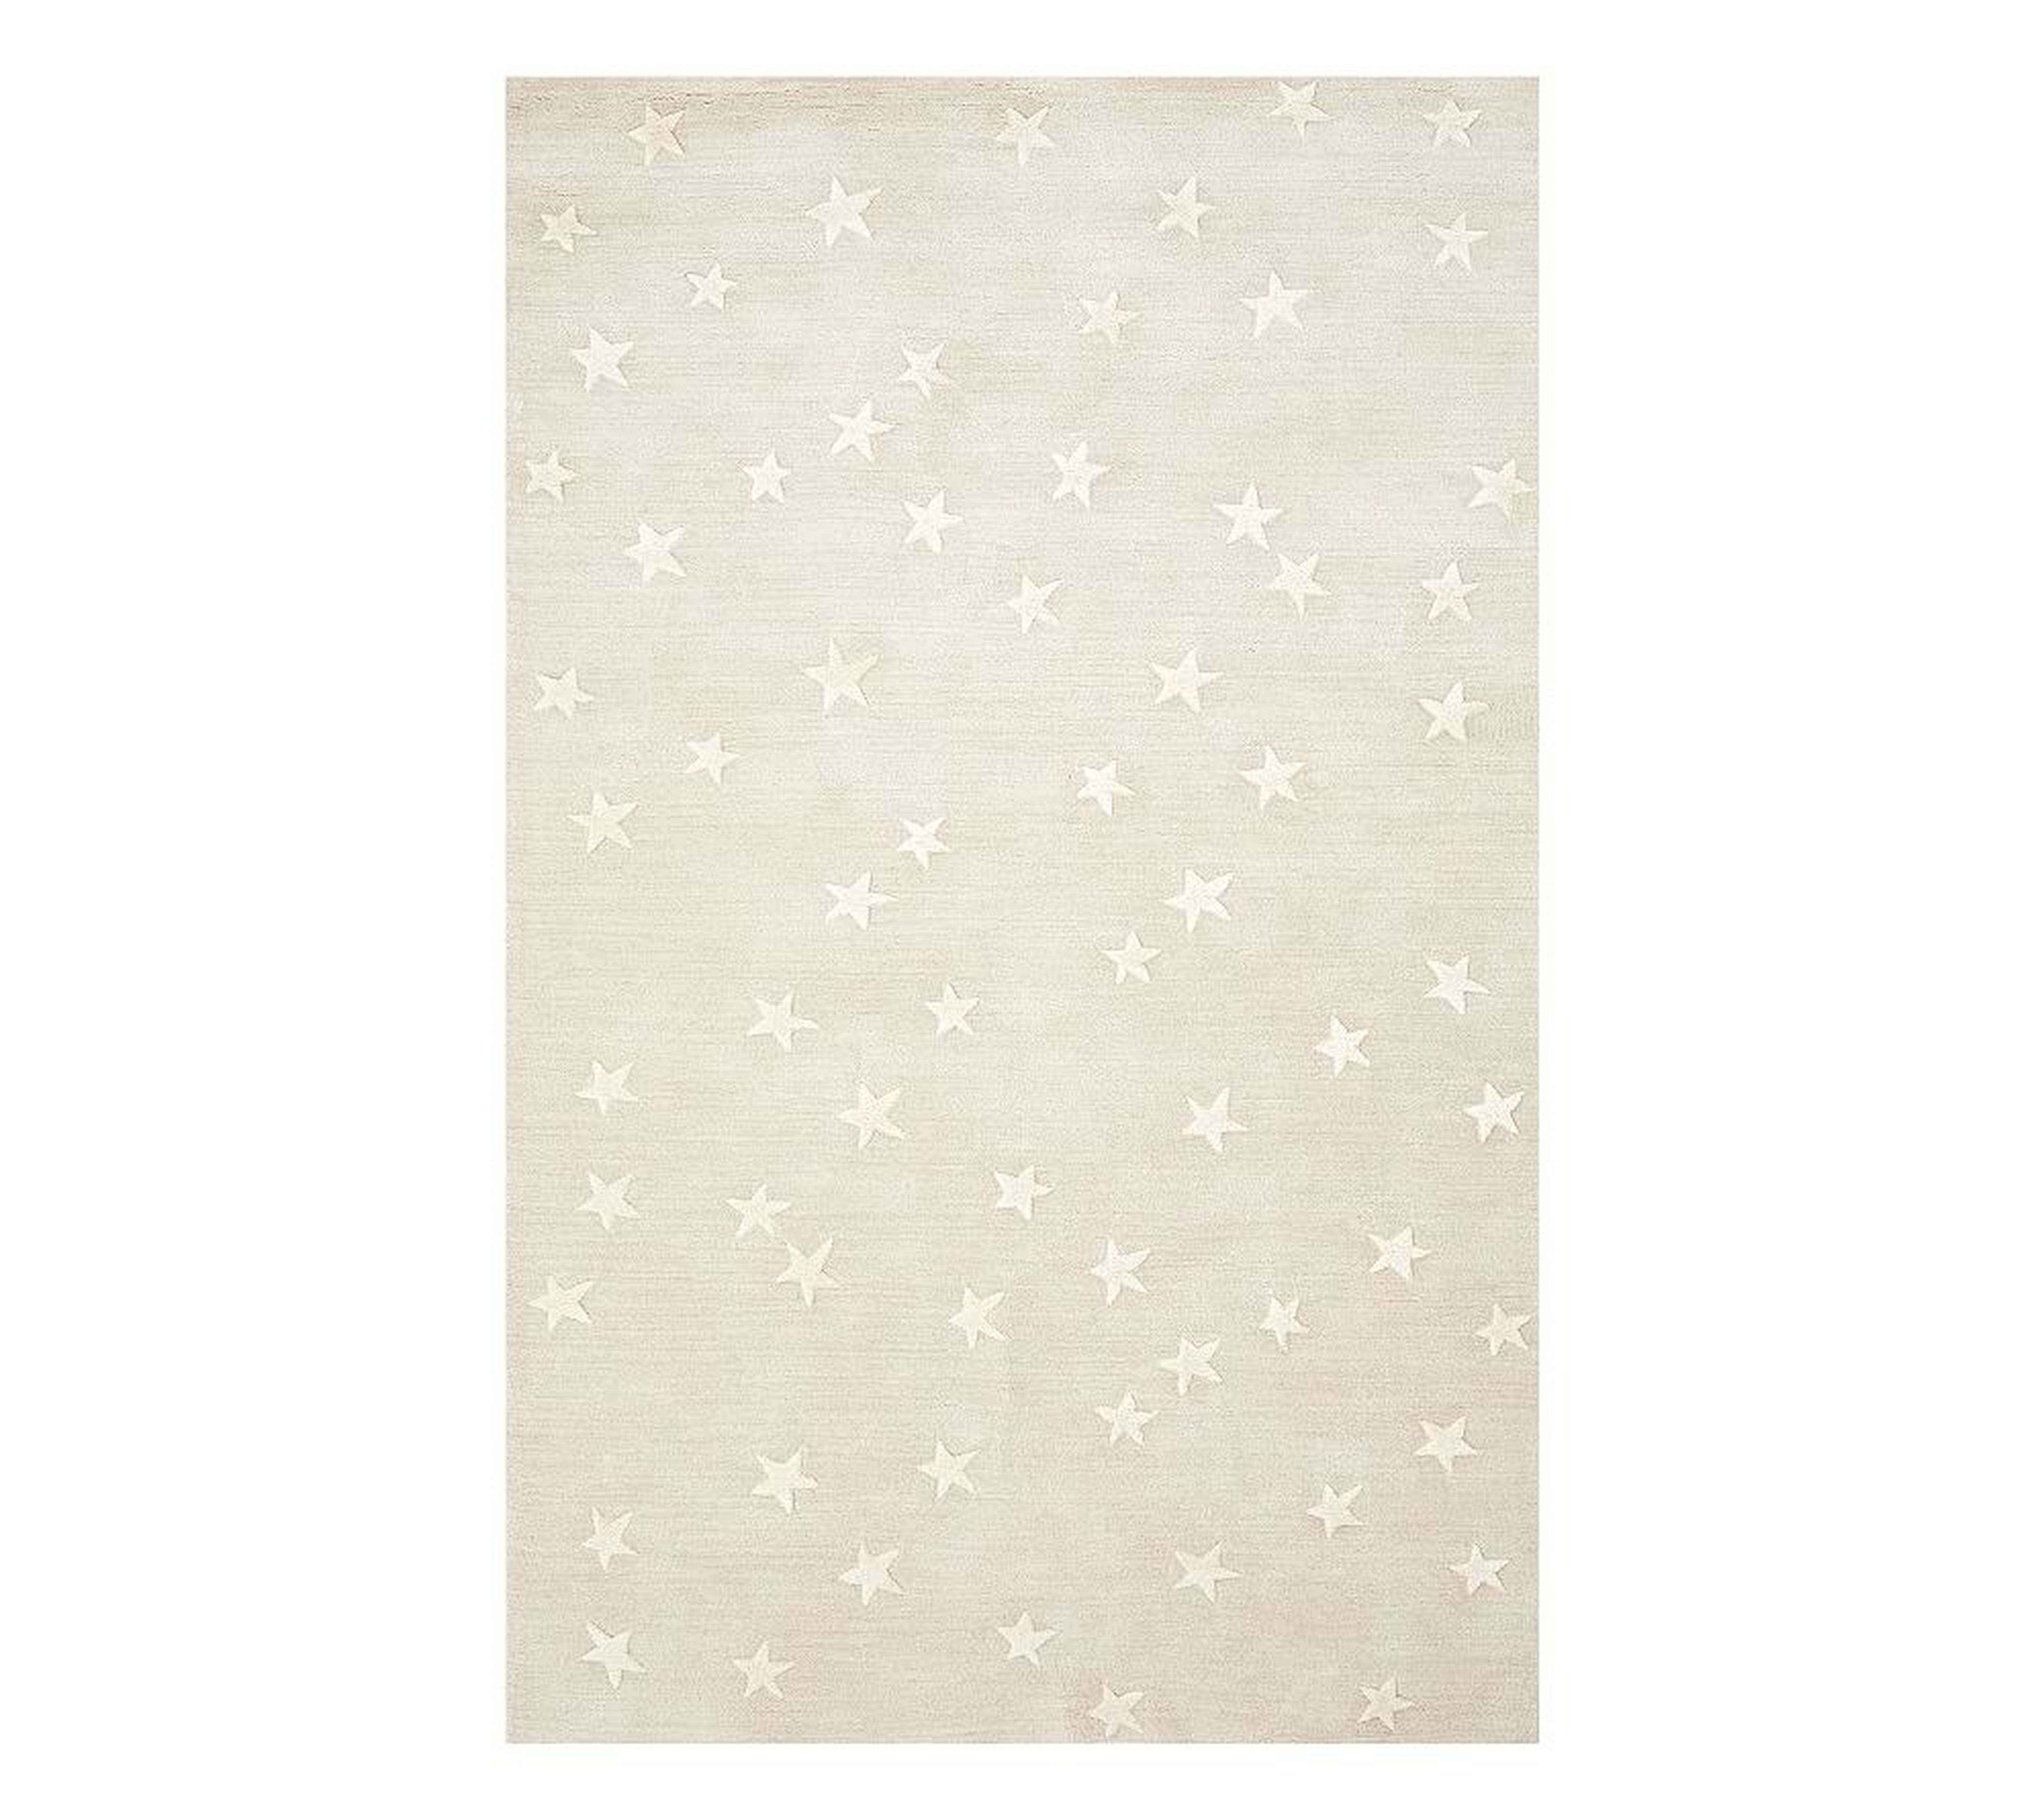 Ids Starry Skies Rug, 7x10, Natural - Pottery Barn Kids